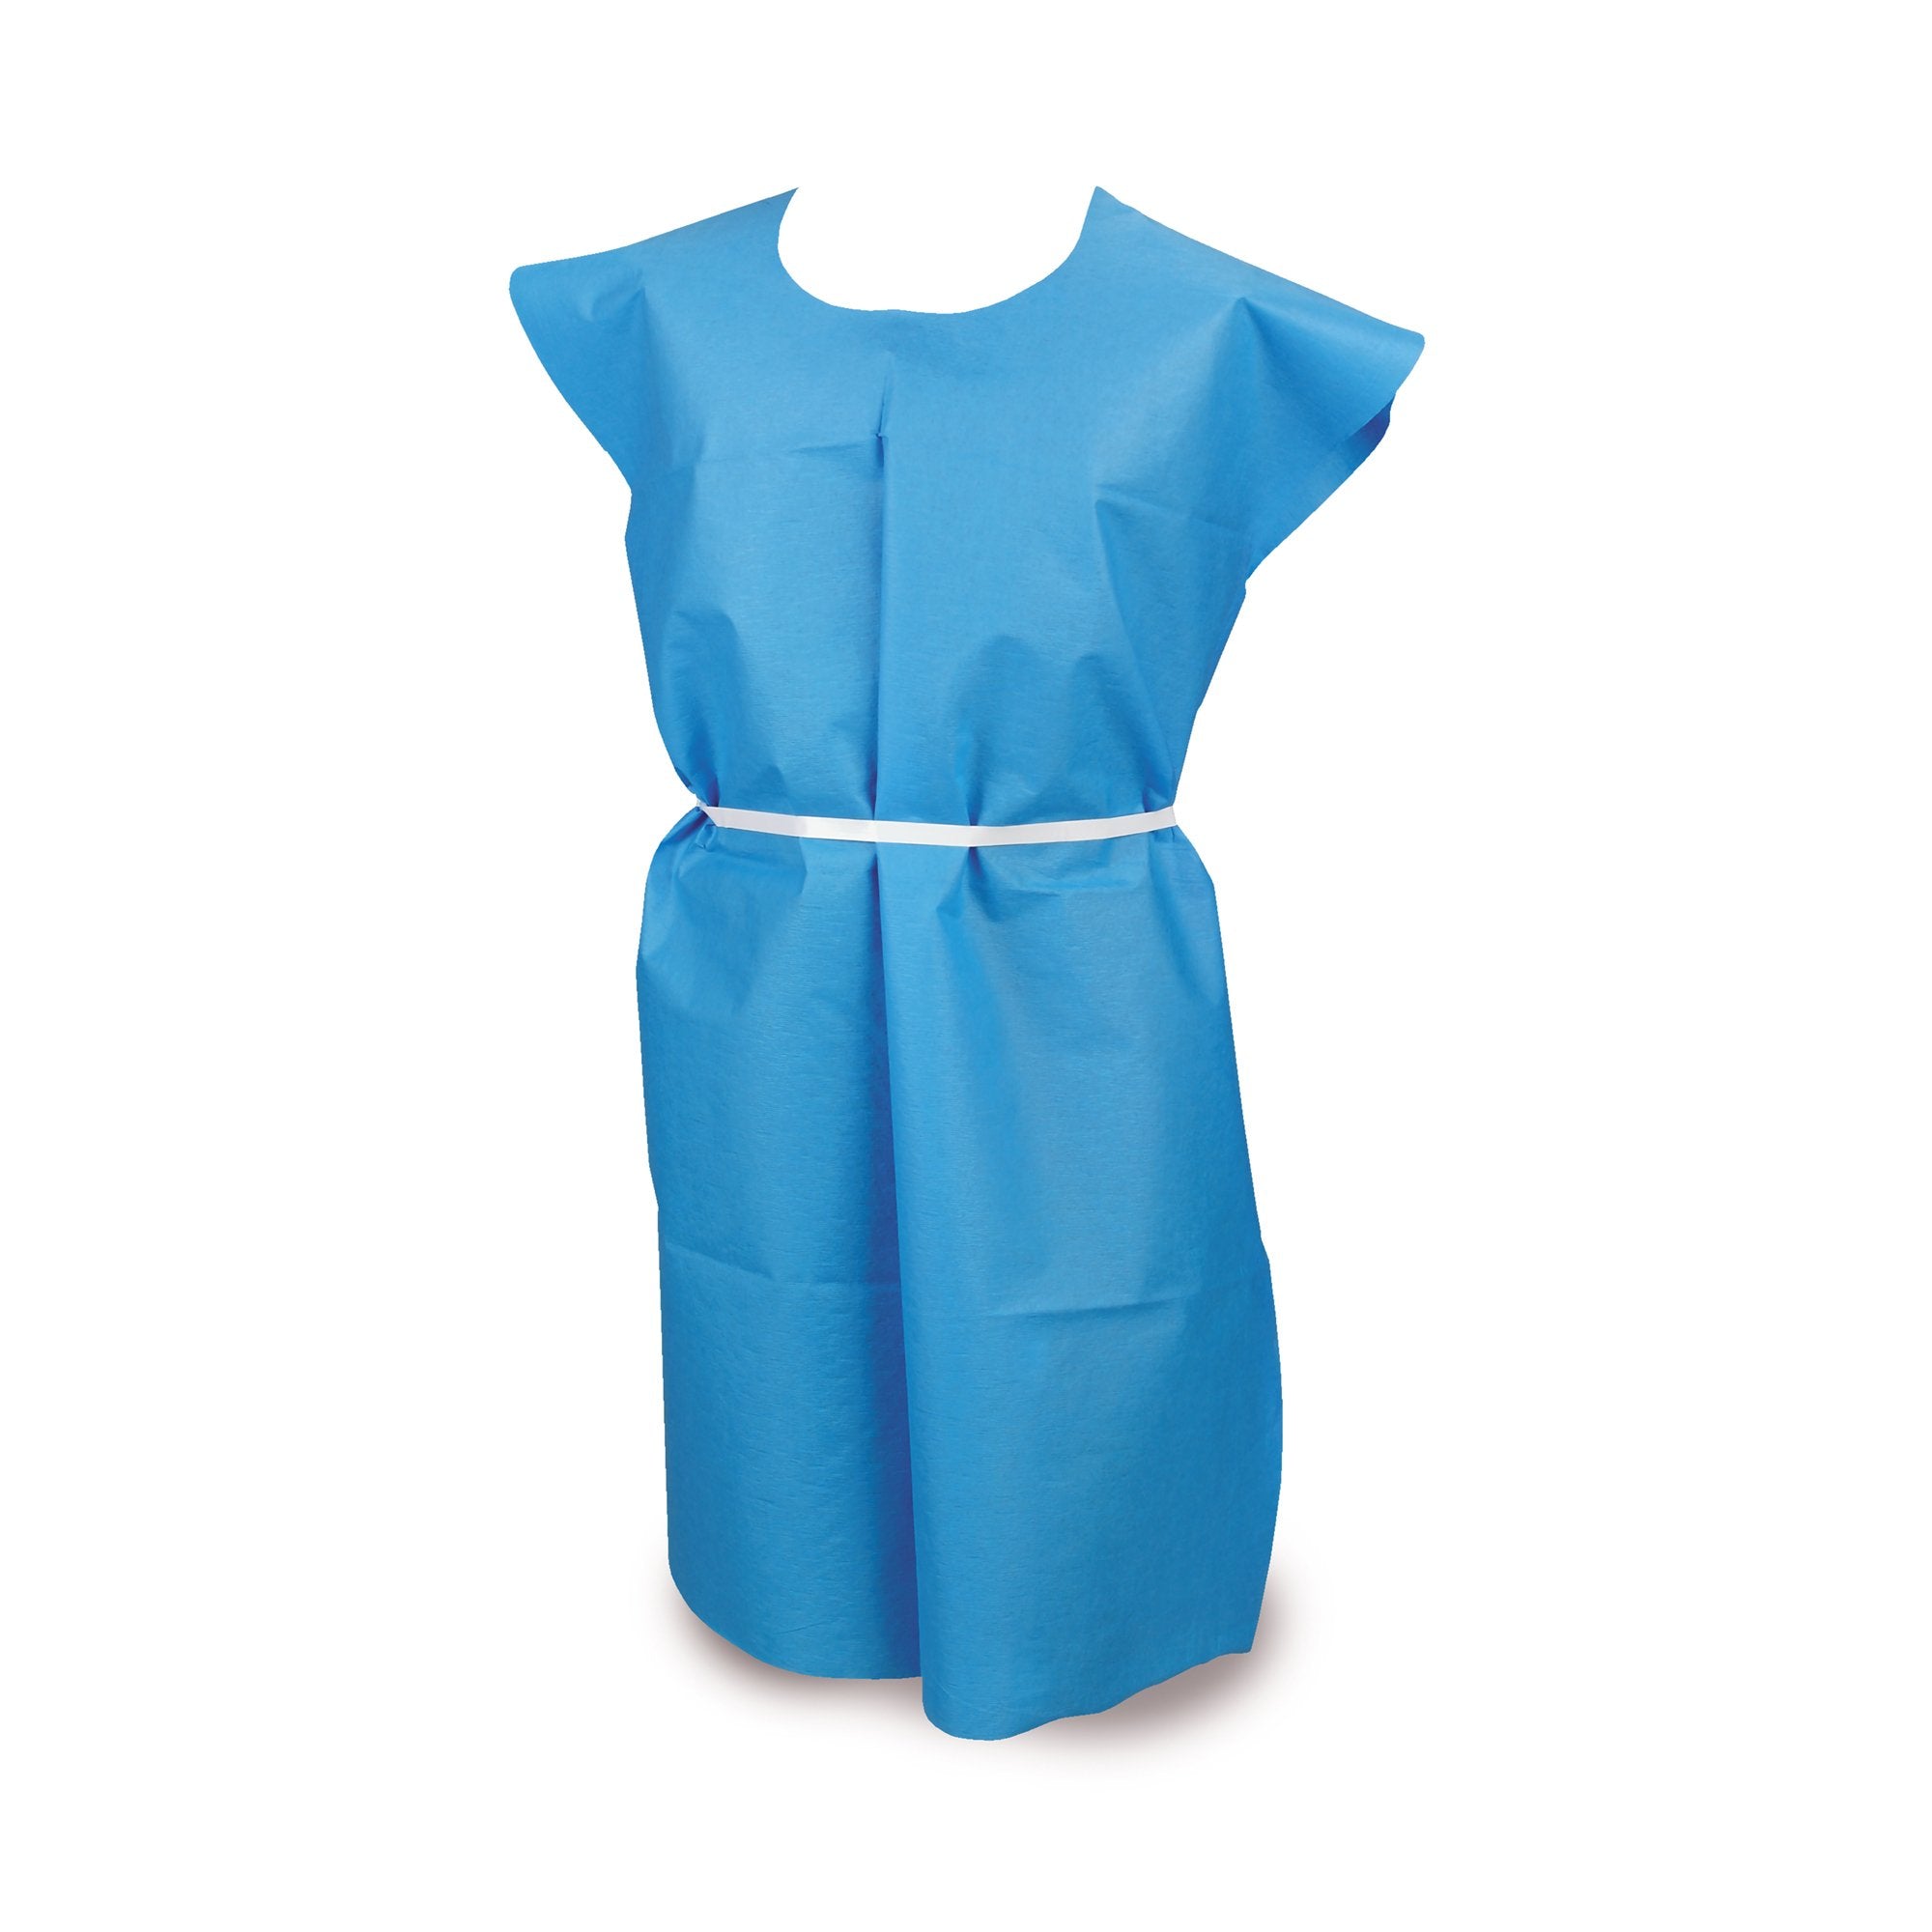 Apparel>Aprons, Bibs and Scrubs - McKesson - Wasatch Medical Supply